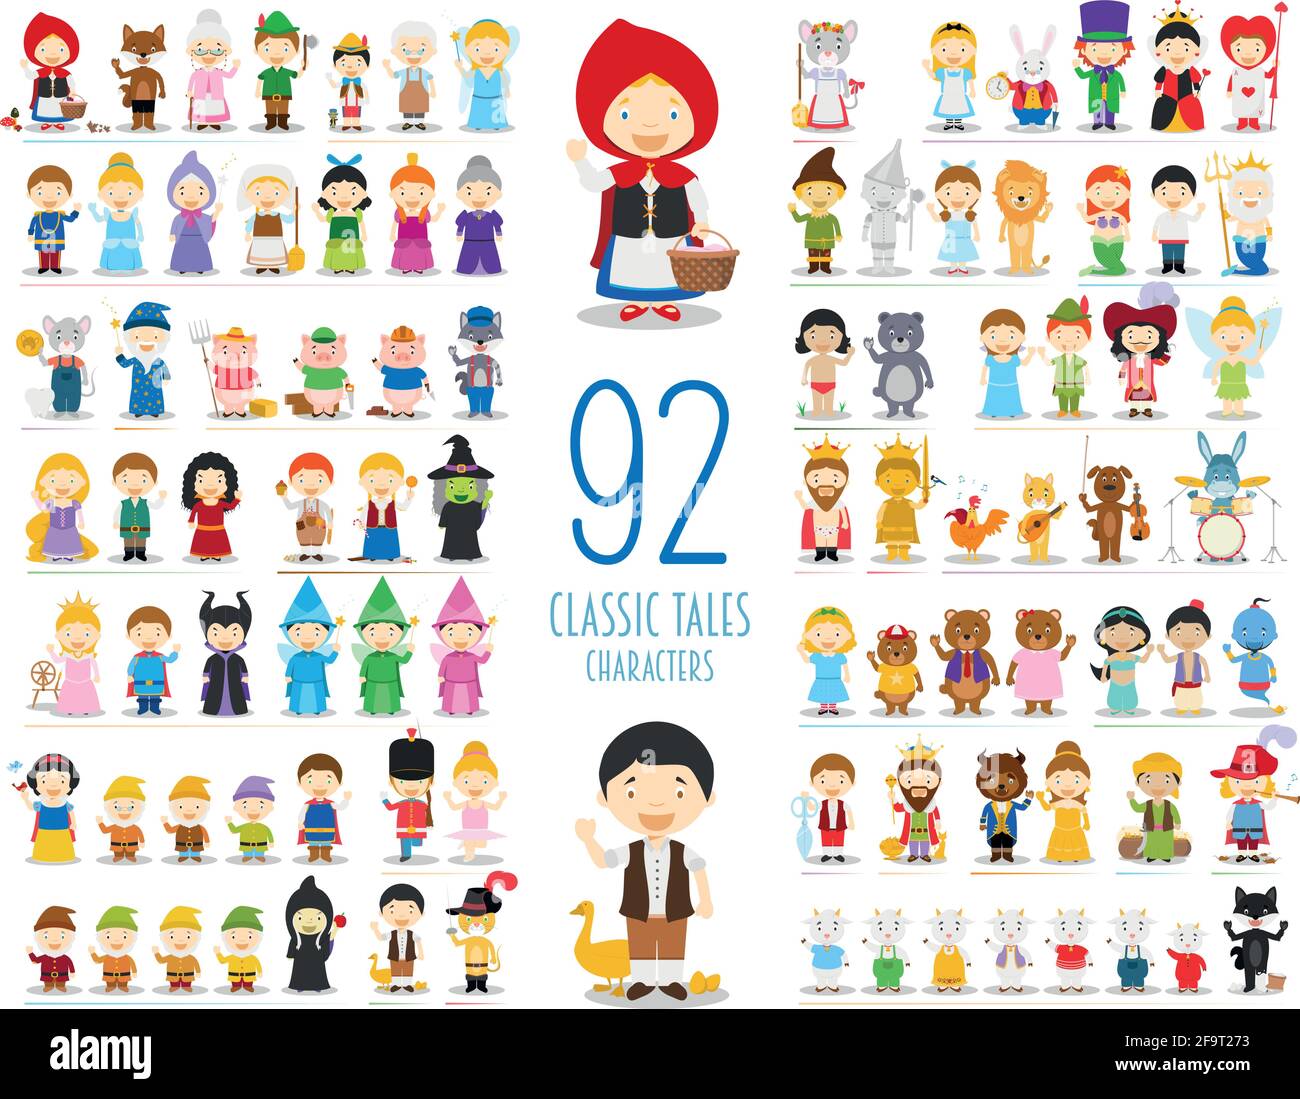 Kids Vector Characters Collection: Set of 92 Classic Tales Characters in cartoon style Stock Vector